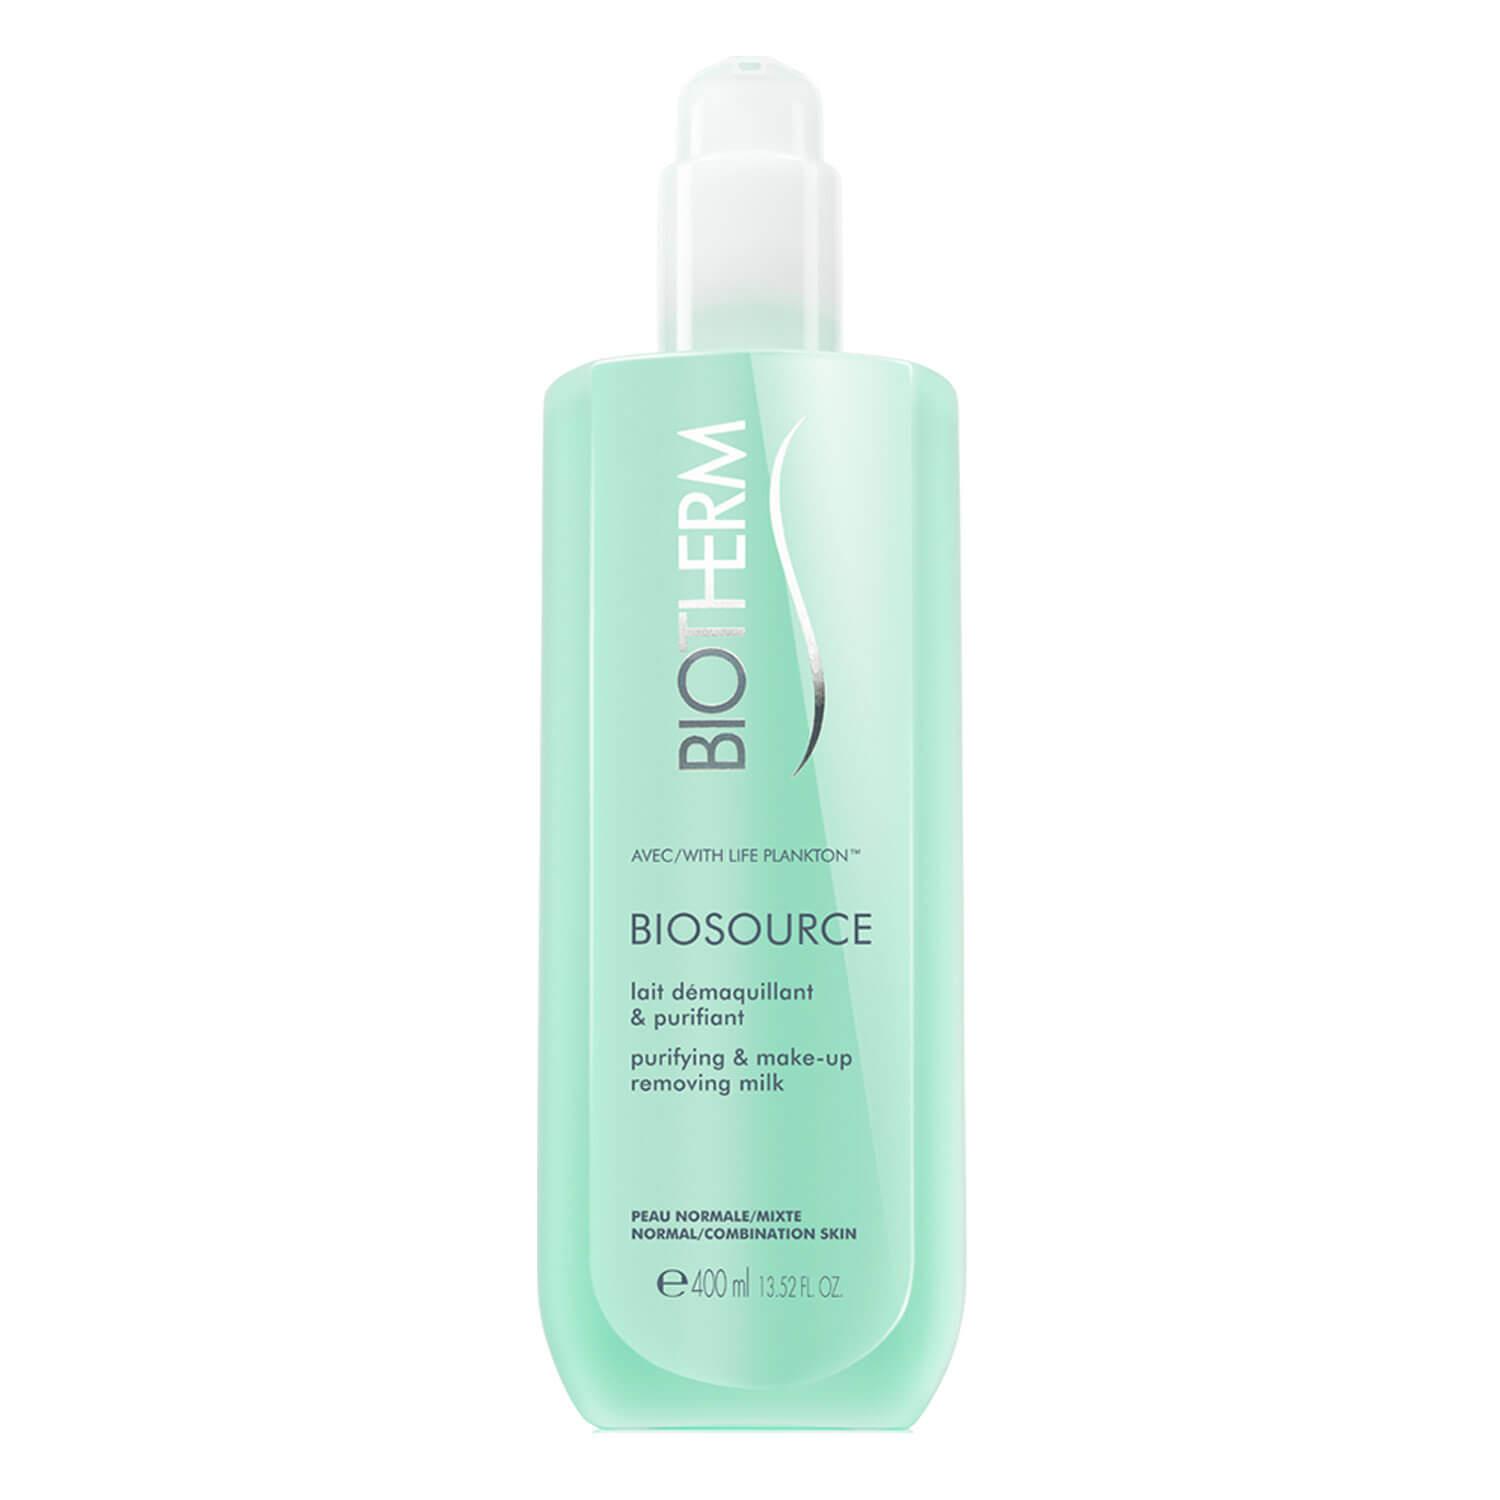 Biosource - Make-Up Removing Milk Normal/Combination Skin Limited Edition